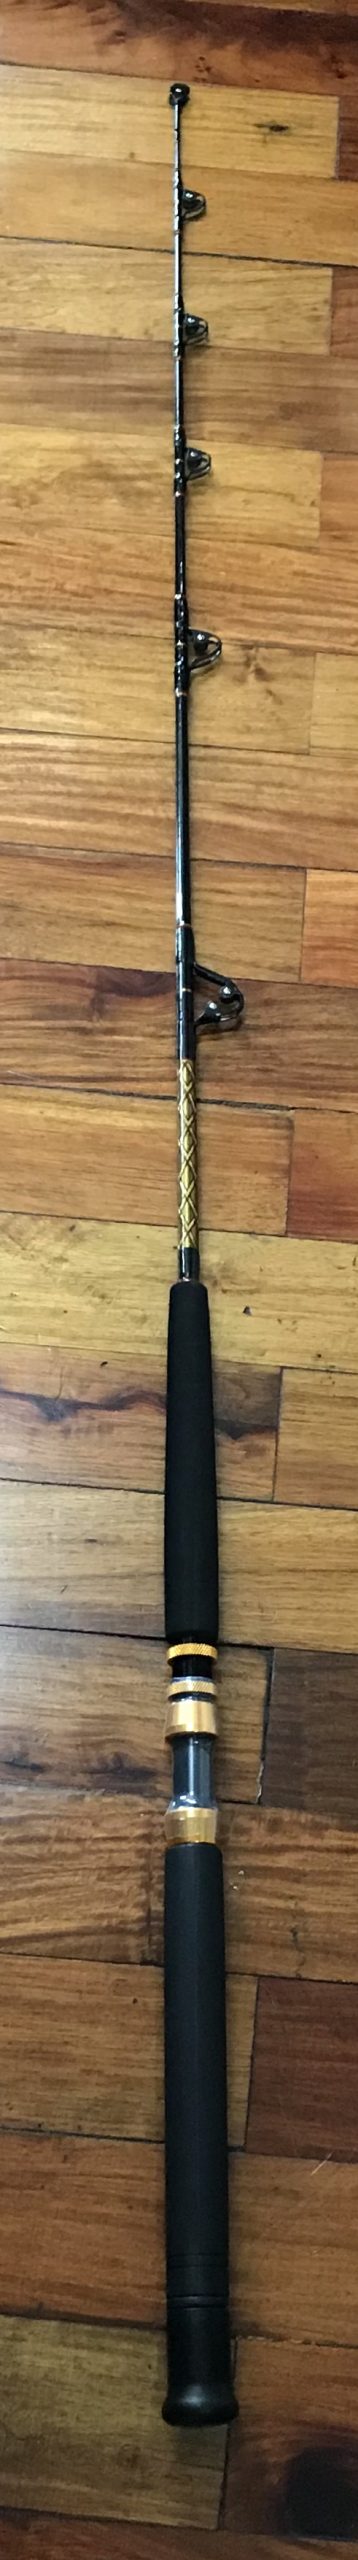 Tica Sea Master GCBR30601 Trolling Rod (To be updated) – Goodcatch